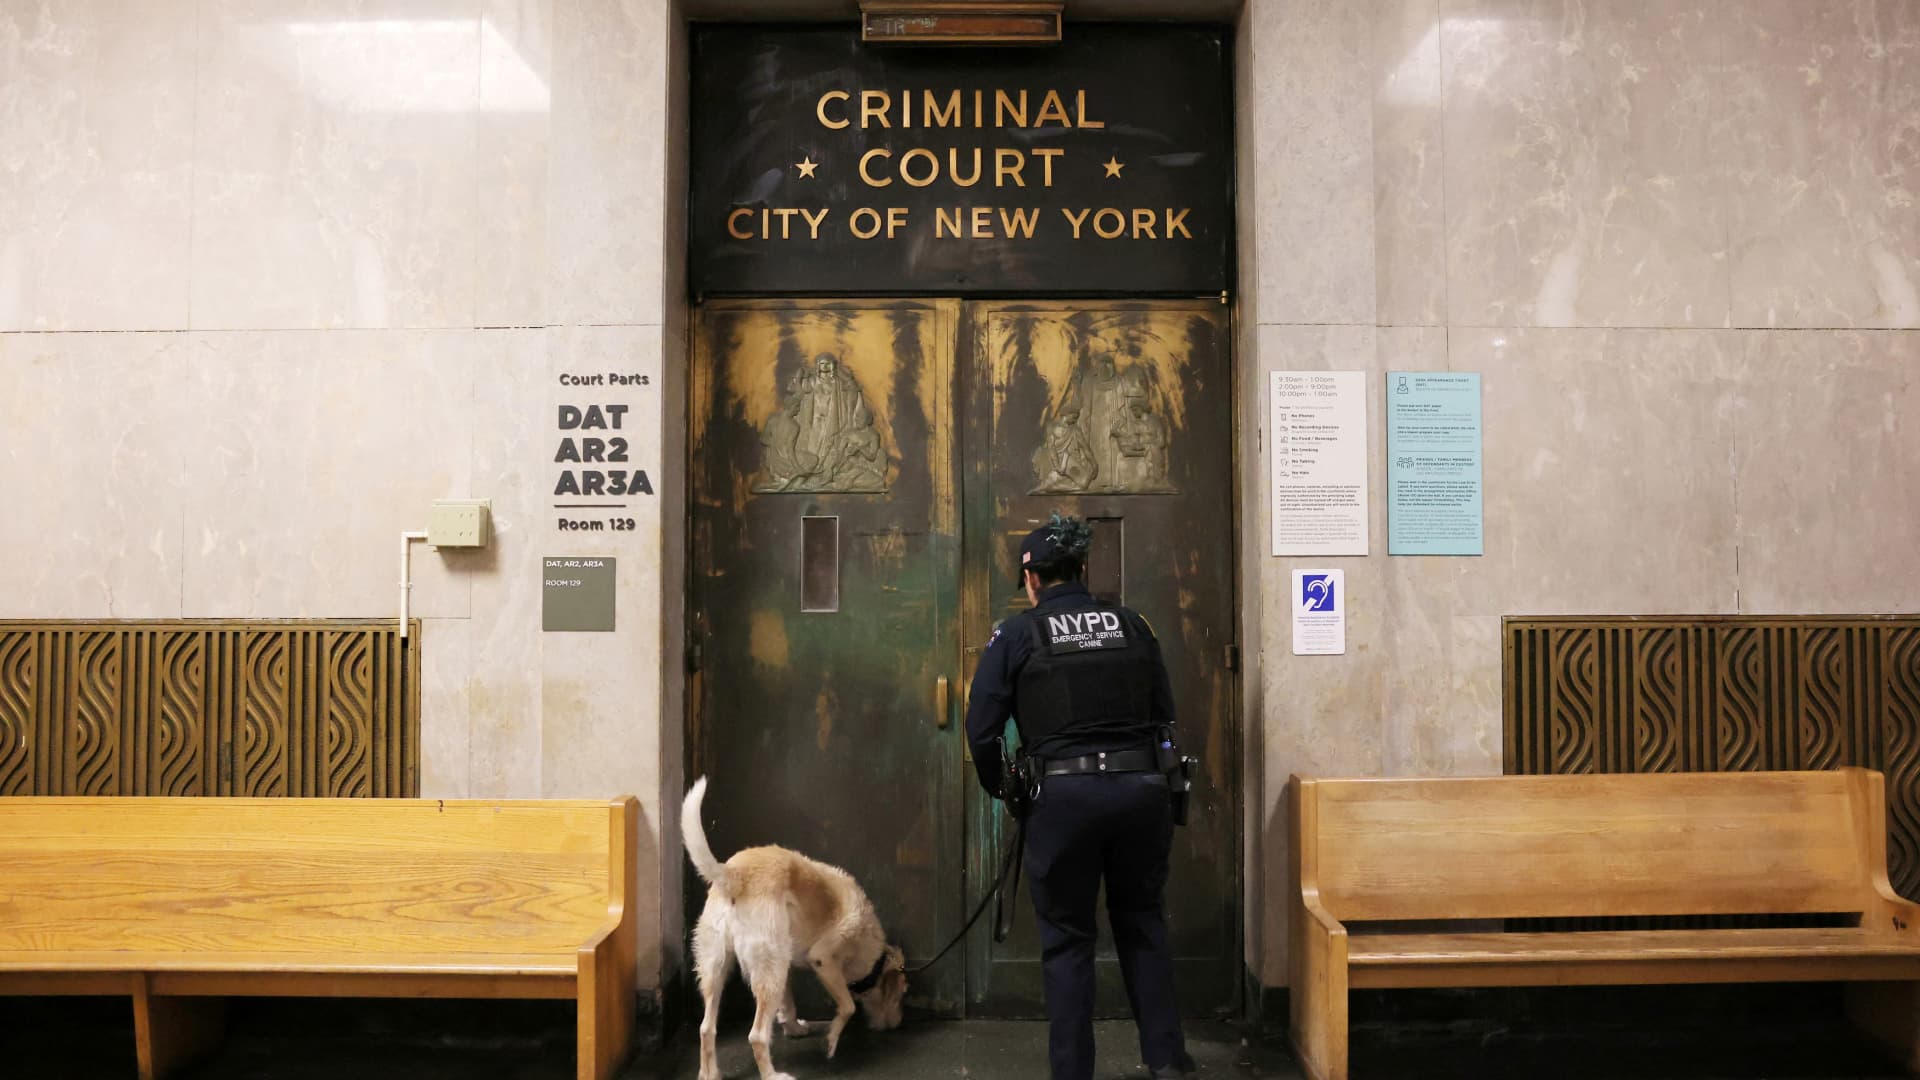 An officer from the New York City Police Department (NYPD) Canine Unit checks outside the Manhattan Criminal Court in New York City, U.S., March 27, 2023. Manhattan District Attorney Alvin Bragg's office is investigating $130,000 paid in the final weeks of former U.S. President Donald Trump's 2016 election campaign to Stormy Daniels, a porn star who said she had a sexual encounter with Trump in 2006 when he was married to his current wife Melania. REUTERS/Andrew Kelly